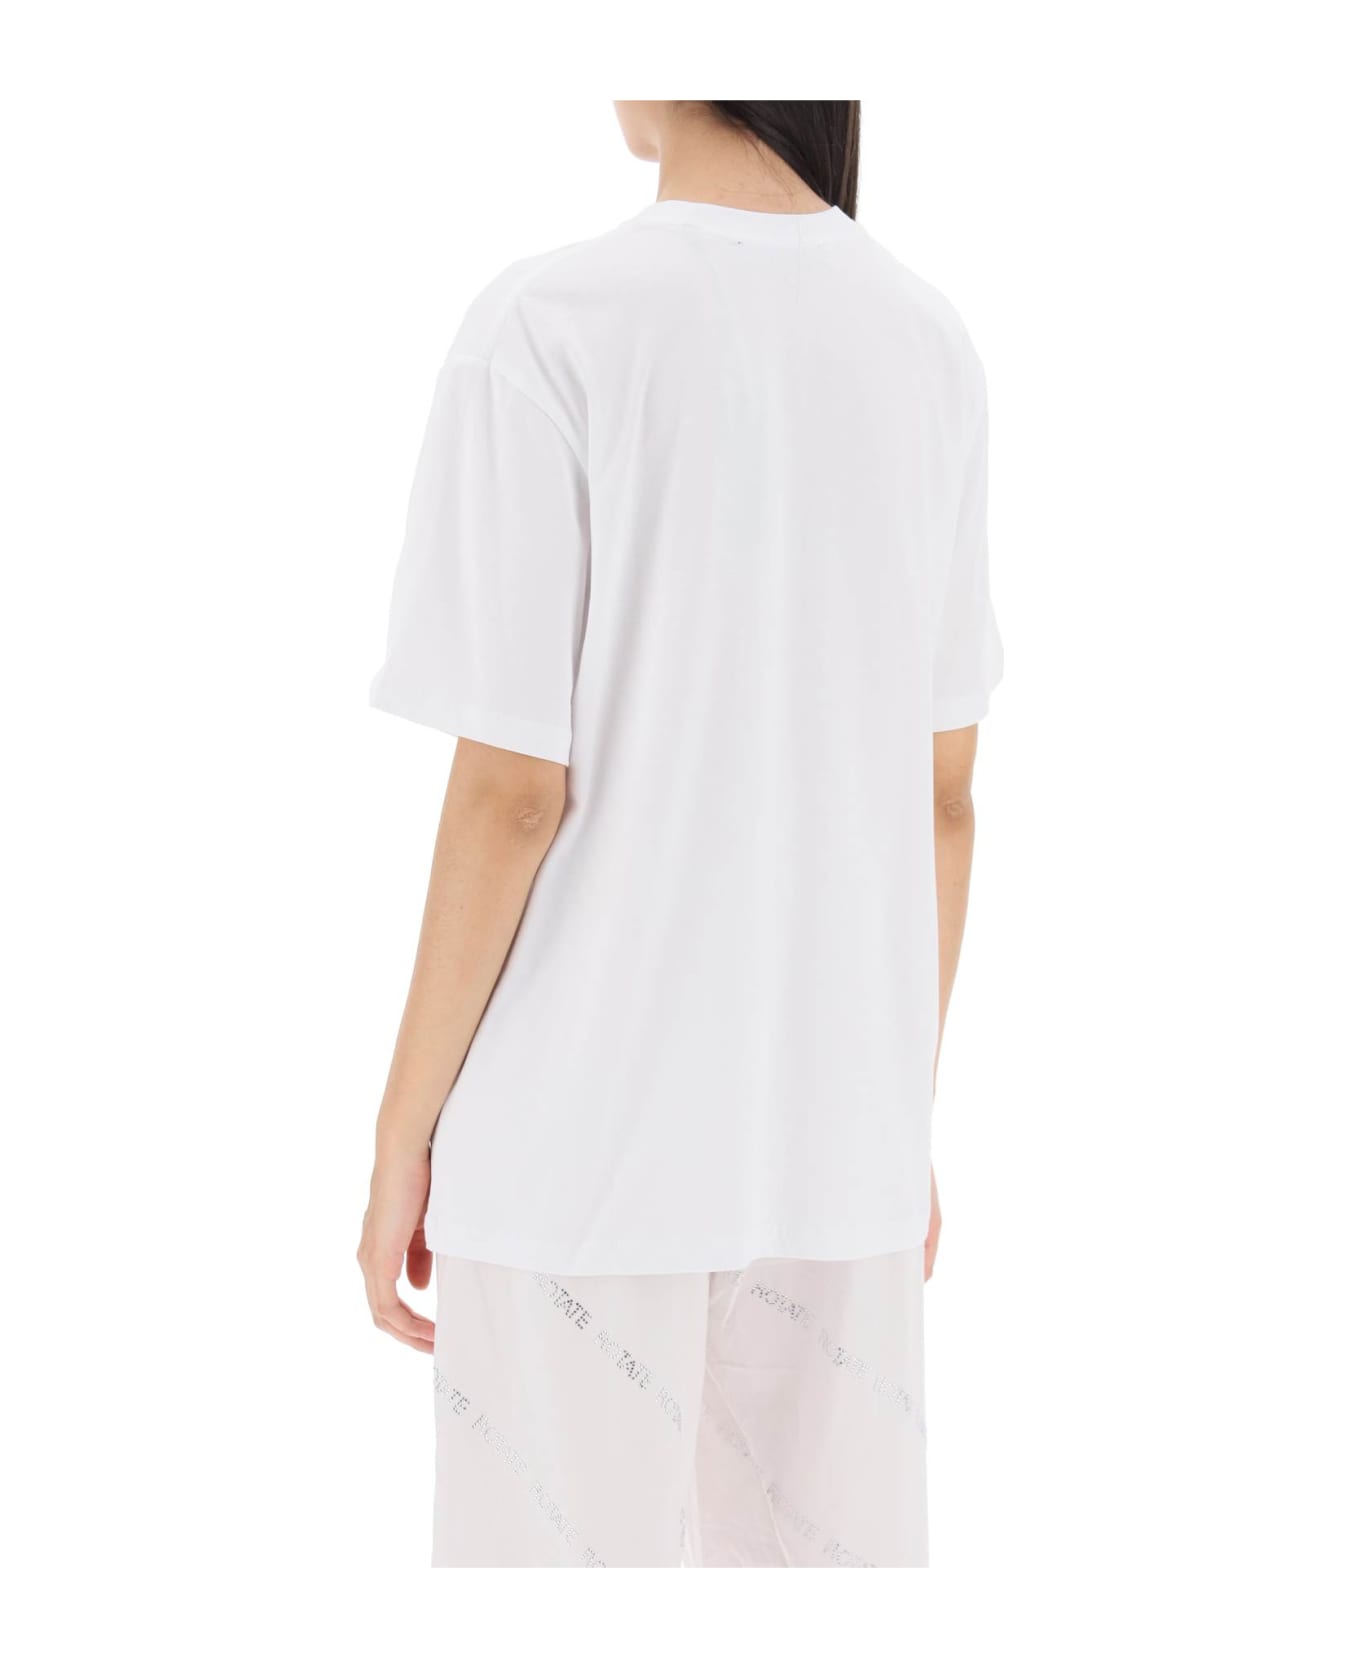 Rotate by Birger Christensen Crew-neck T-shirt With Crystal Logo - BRIGHT WHITE (White)